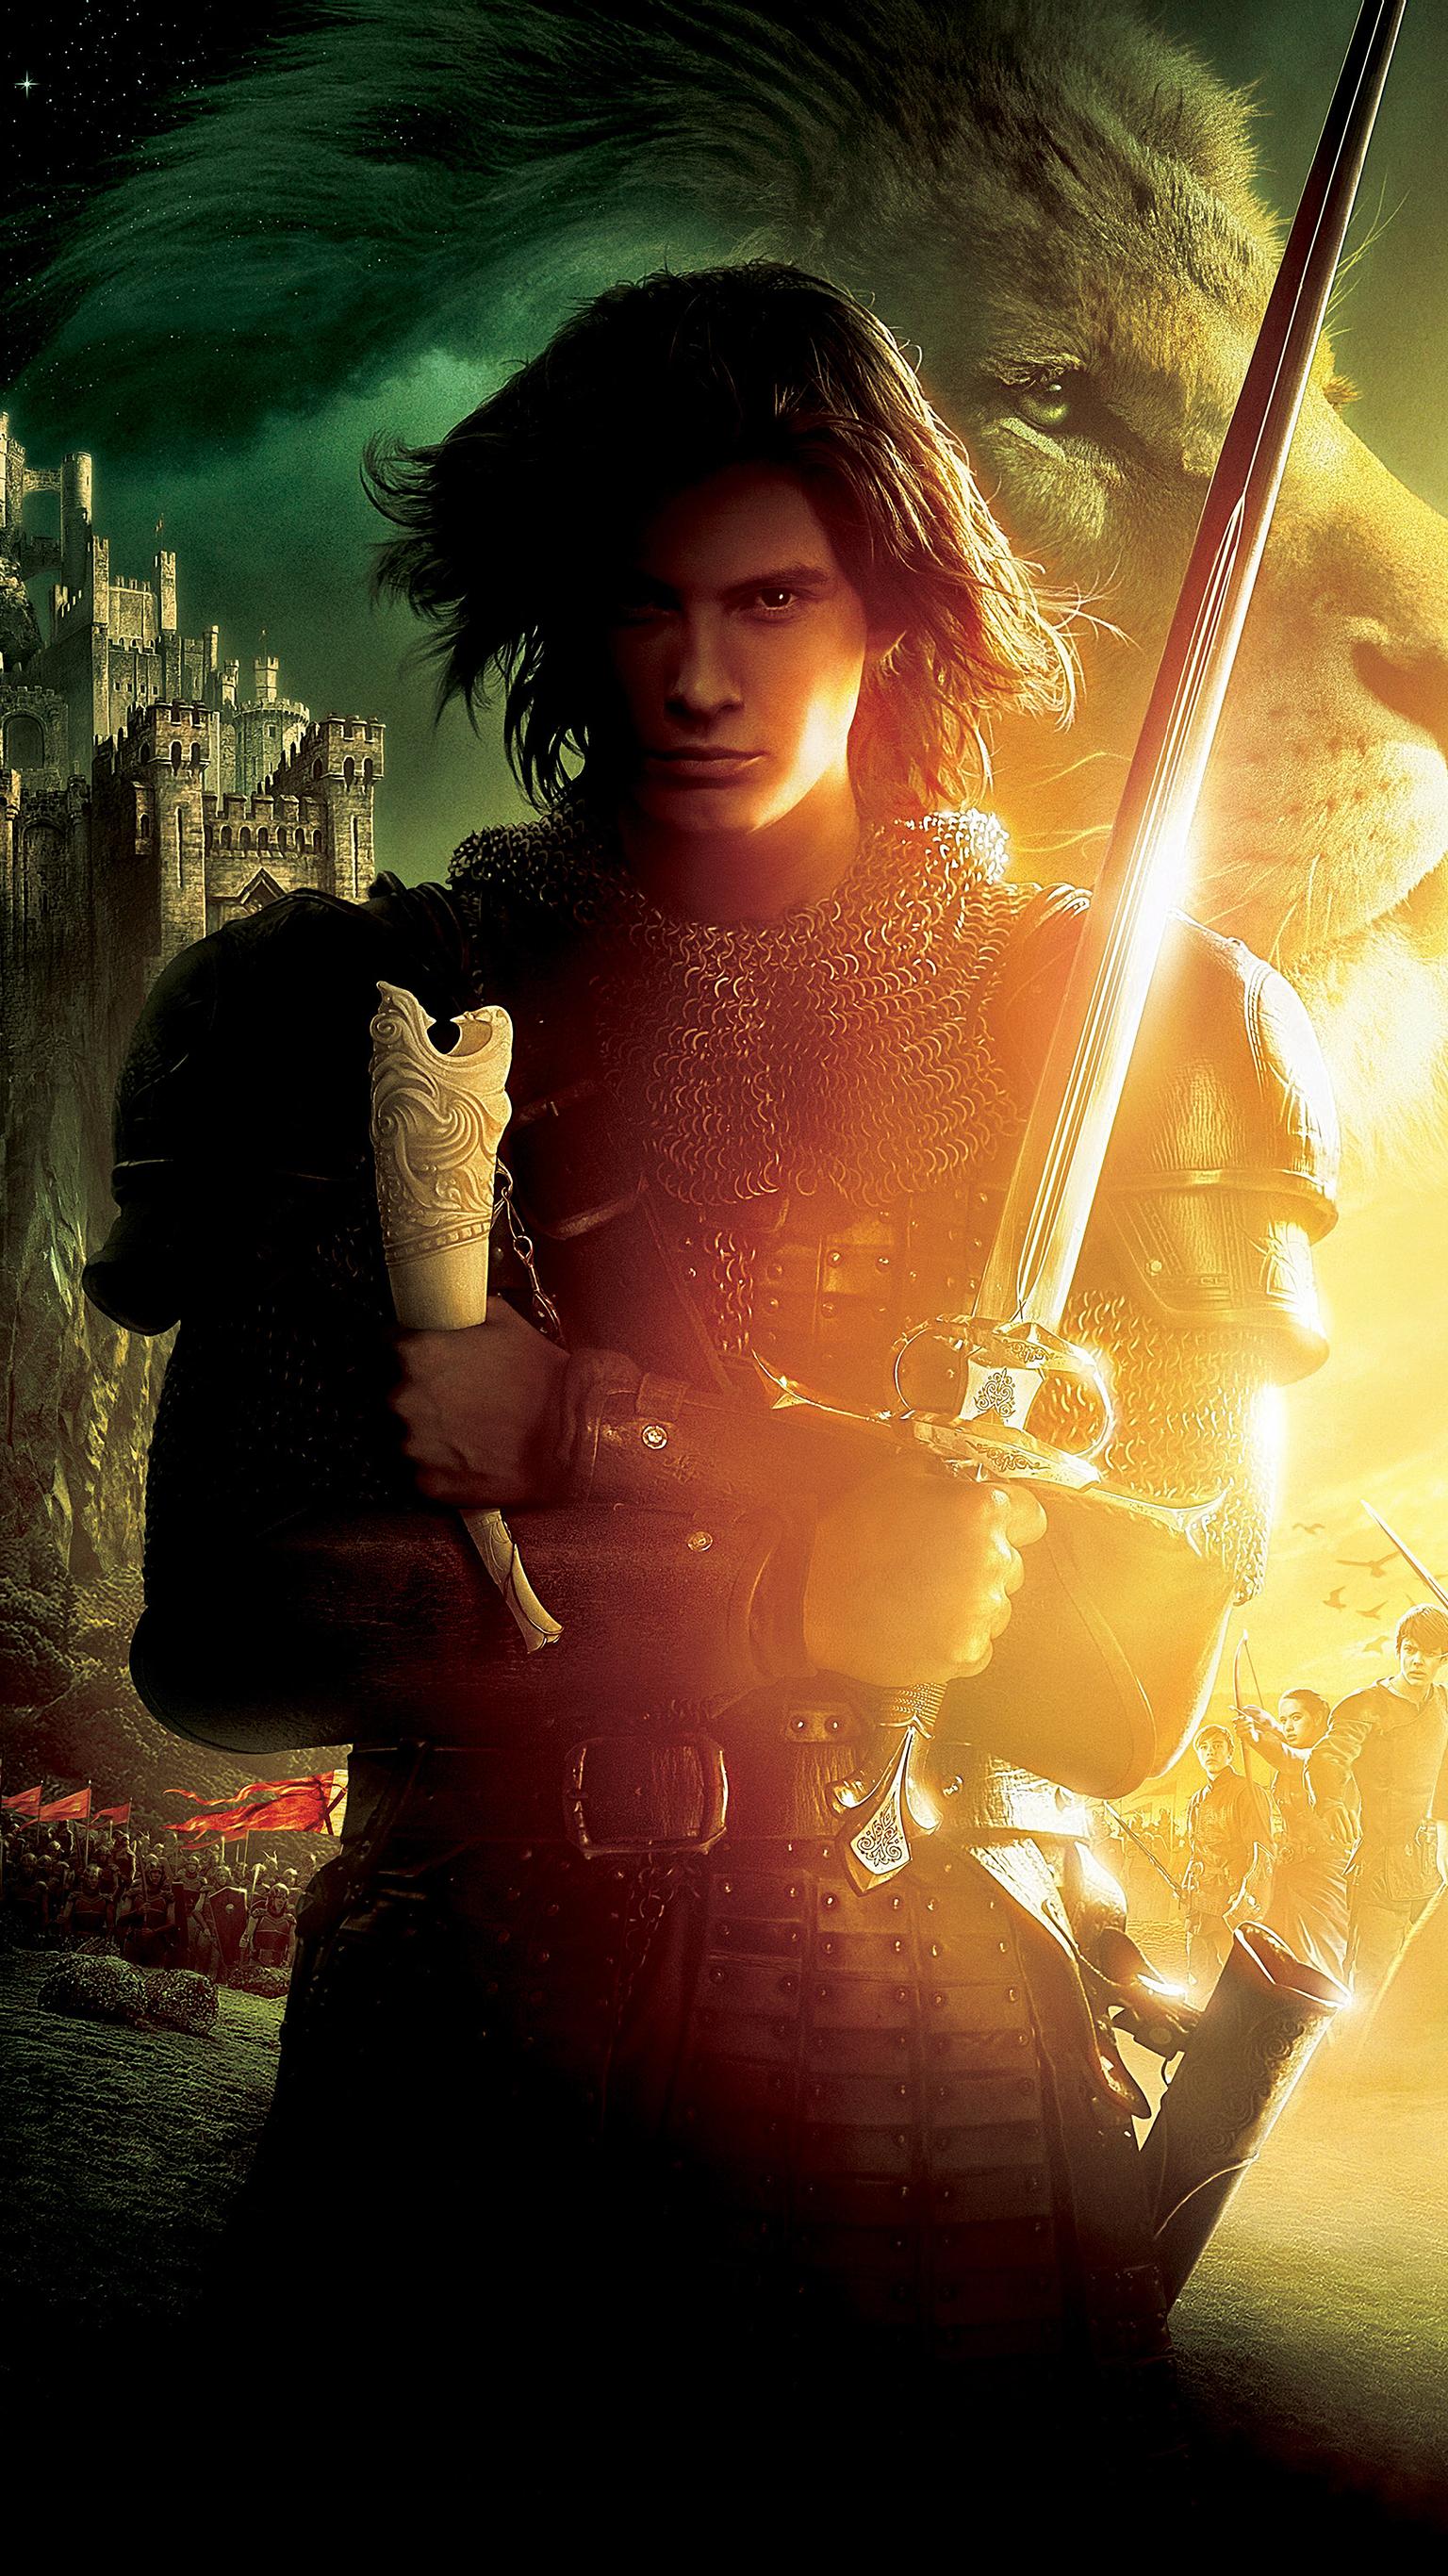 The Chronicles of Narnia: Prince Caspian (2008) Phone Wallpaper